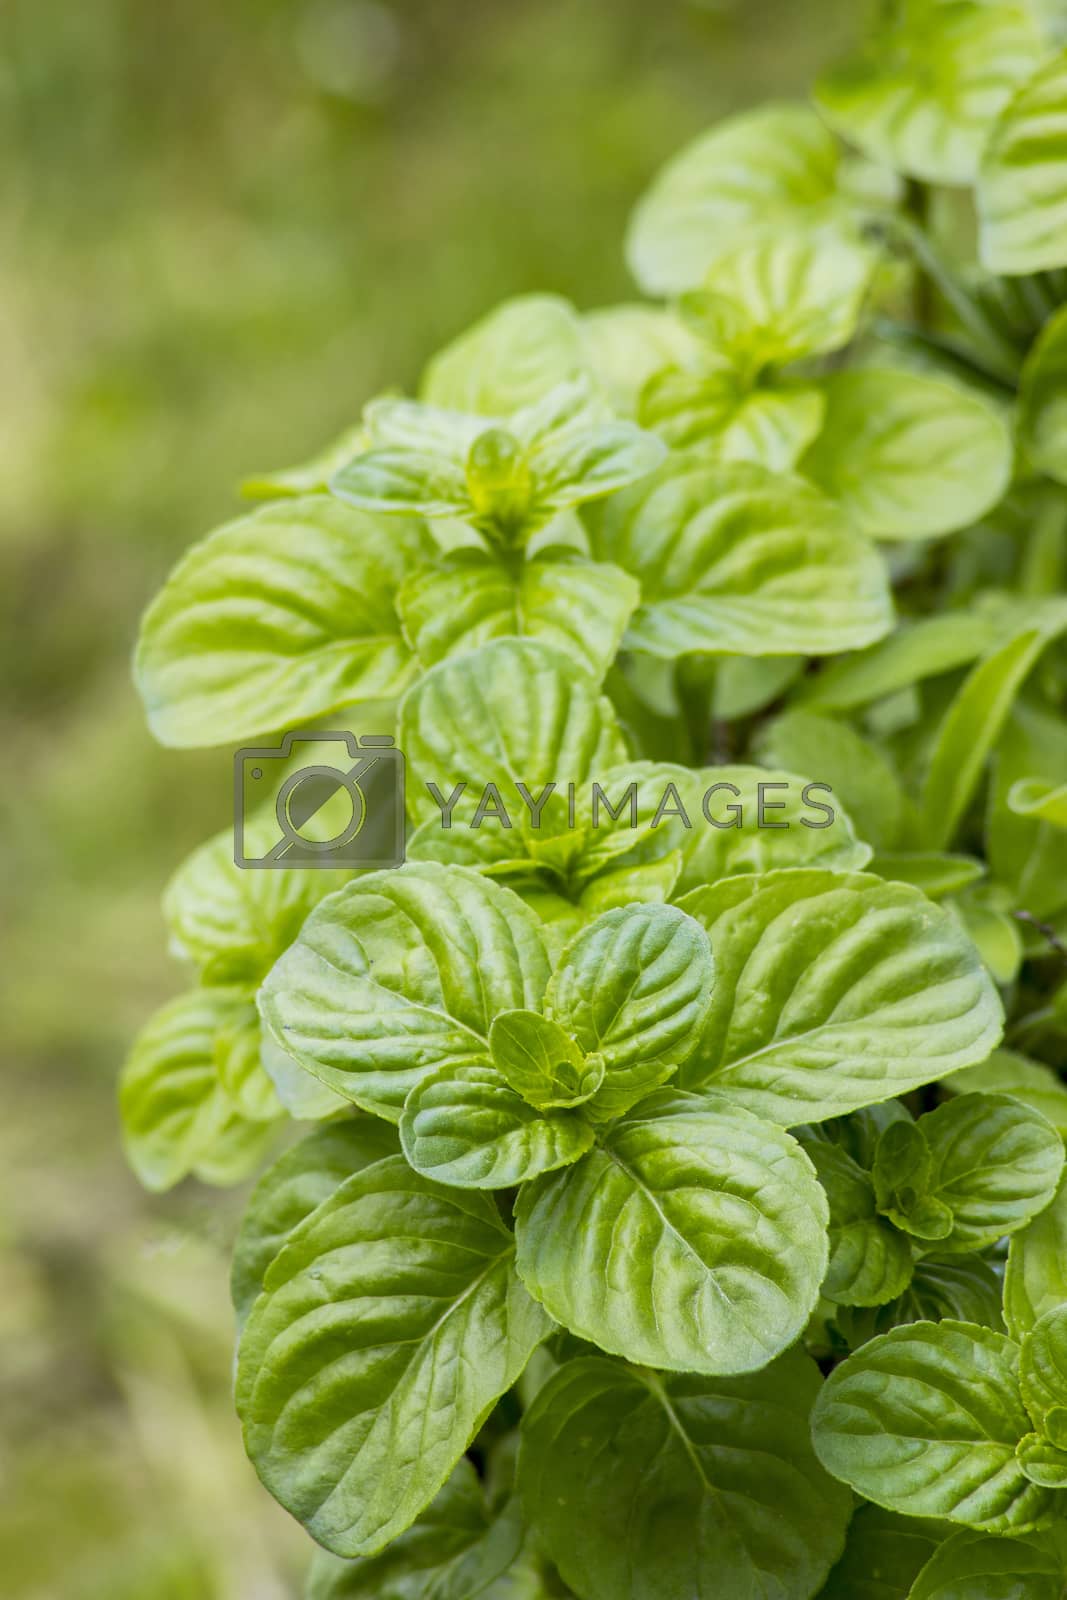 Royalty free image of Mint plant grown at garden by miradrozdowski